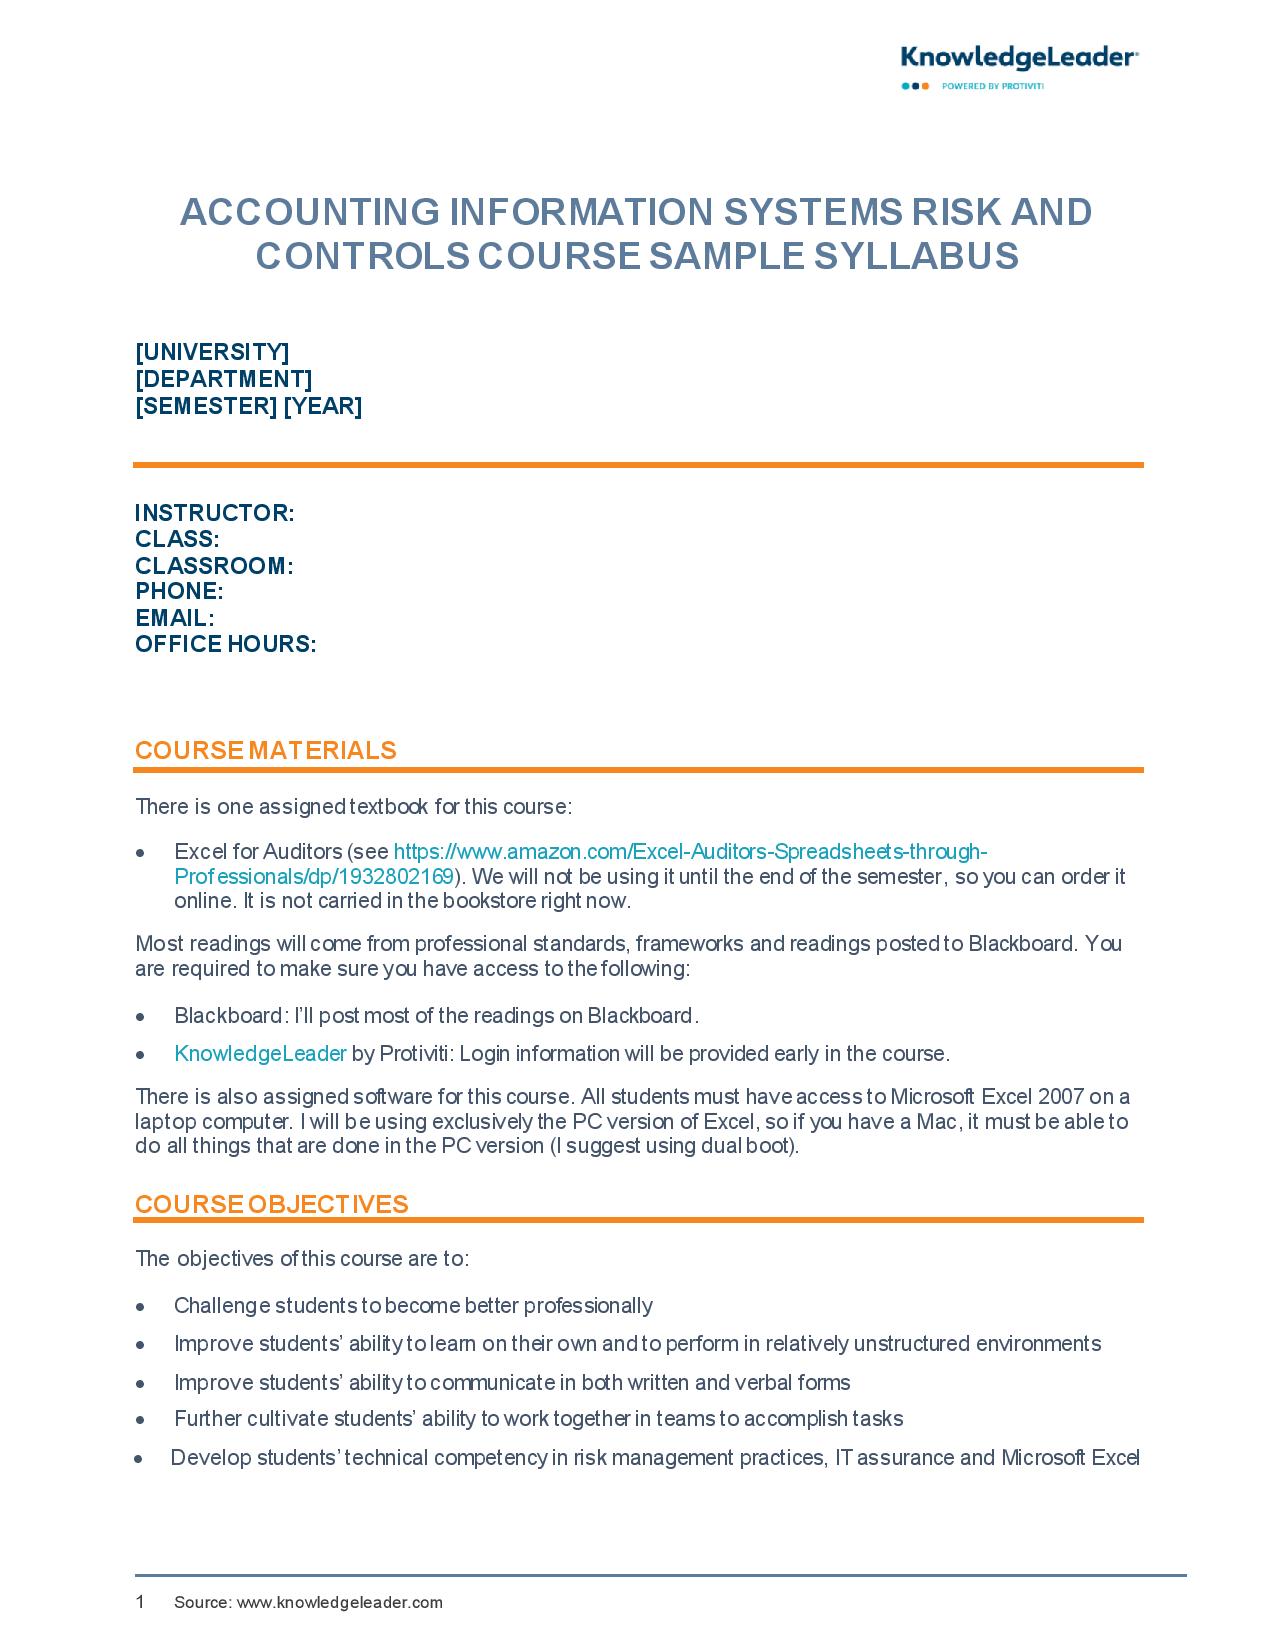 Screenshot of first page of Accounting Information Systems Risk and Controls Course Sample Syllabus